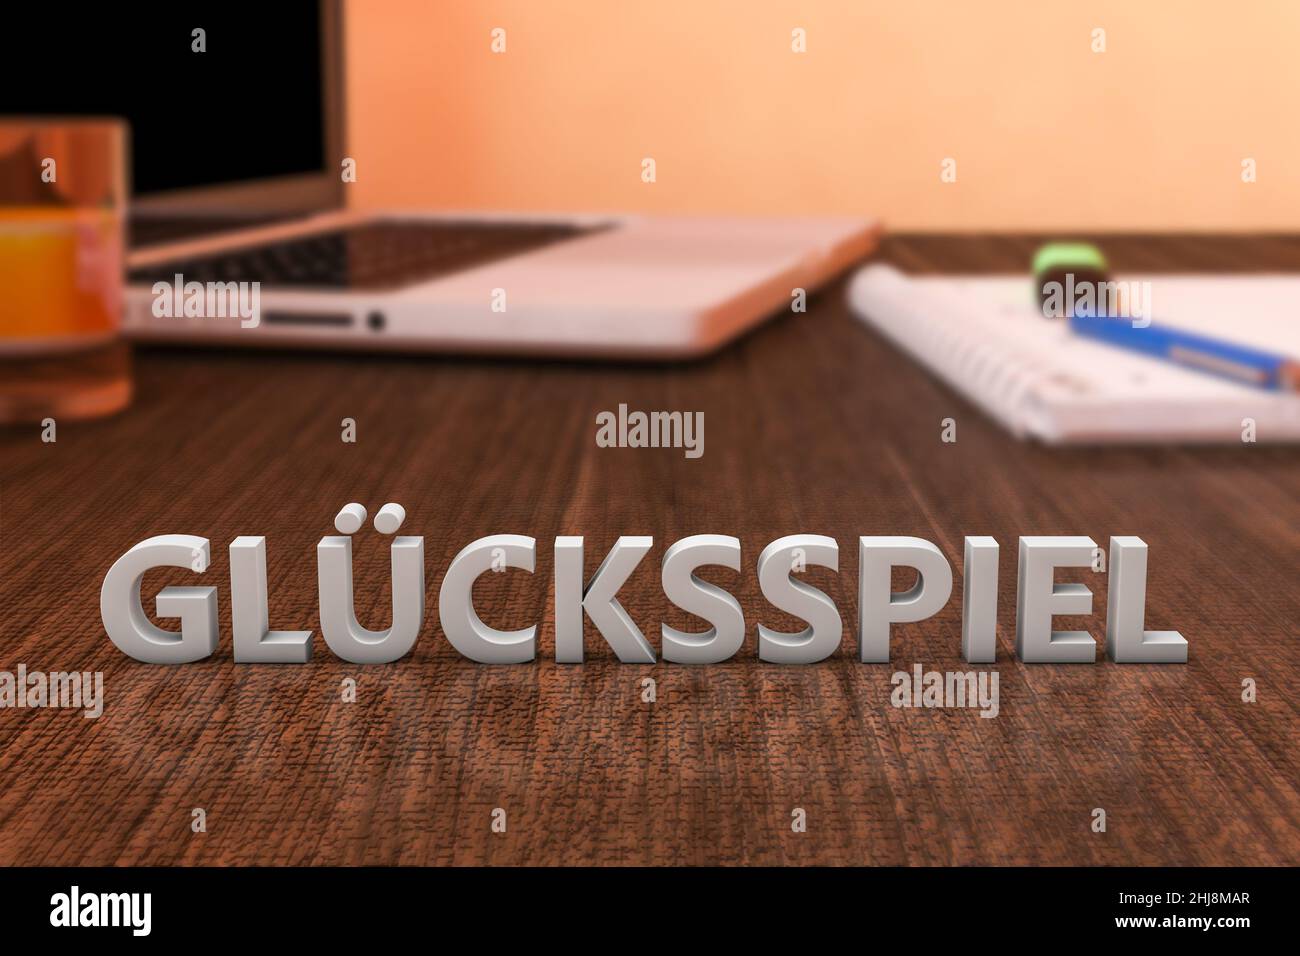 Gluecksspiel - german word for gambling or game of chance - letters on wooden desk with laptop computer and a notebook. 3d render illustration. Stock Photo